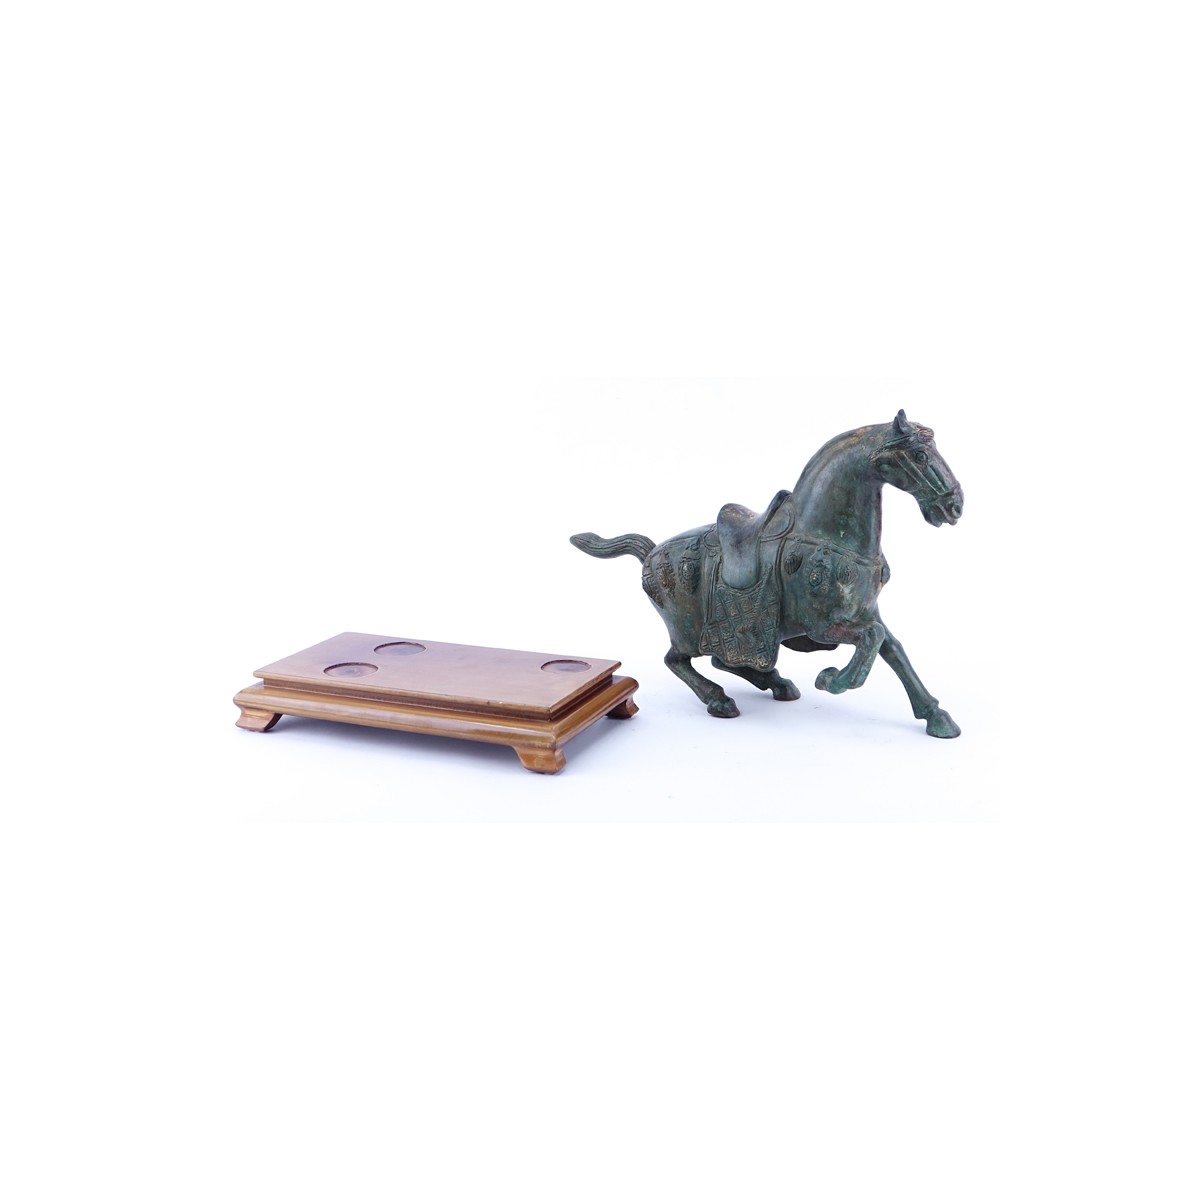 Chinese Tang Dynasty Style Patinated Bronze Model of a Horse on Wooden Stand. Rubbing to surface, s